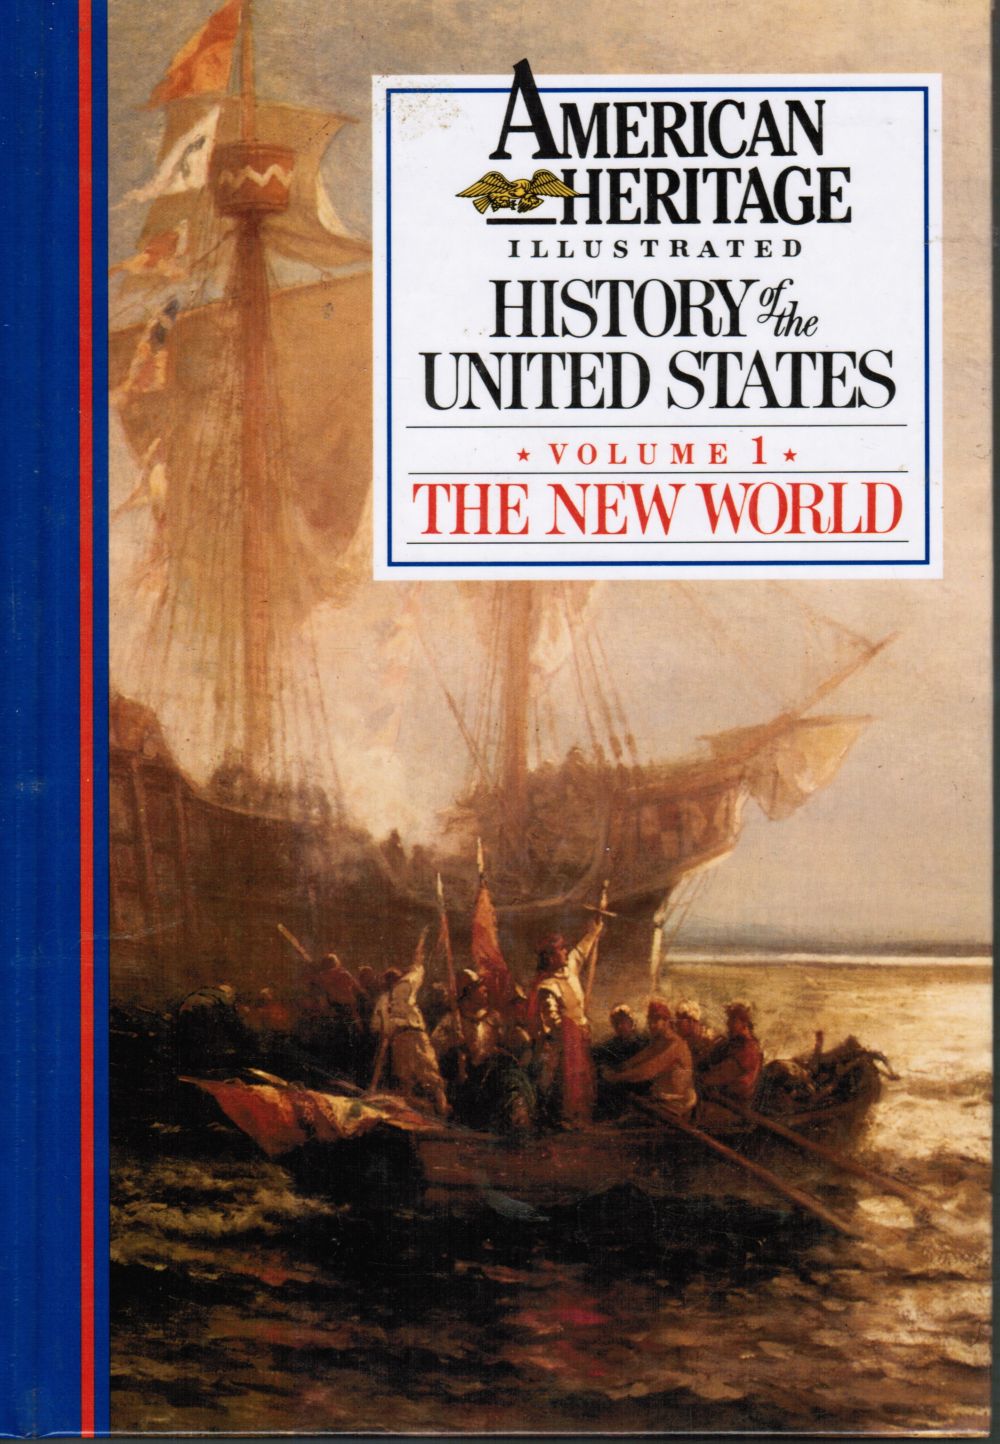 ATHEARN, ROBERT G. AND THE EDITORS OF AMERICAN HERITAGE - The New World: Volume 1